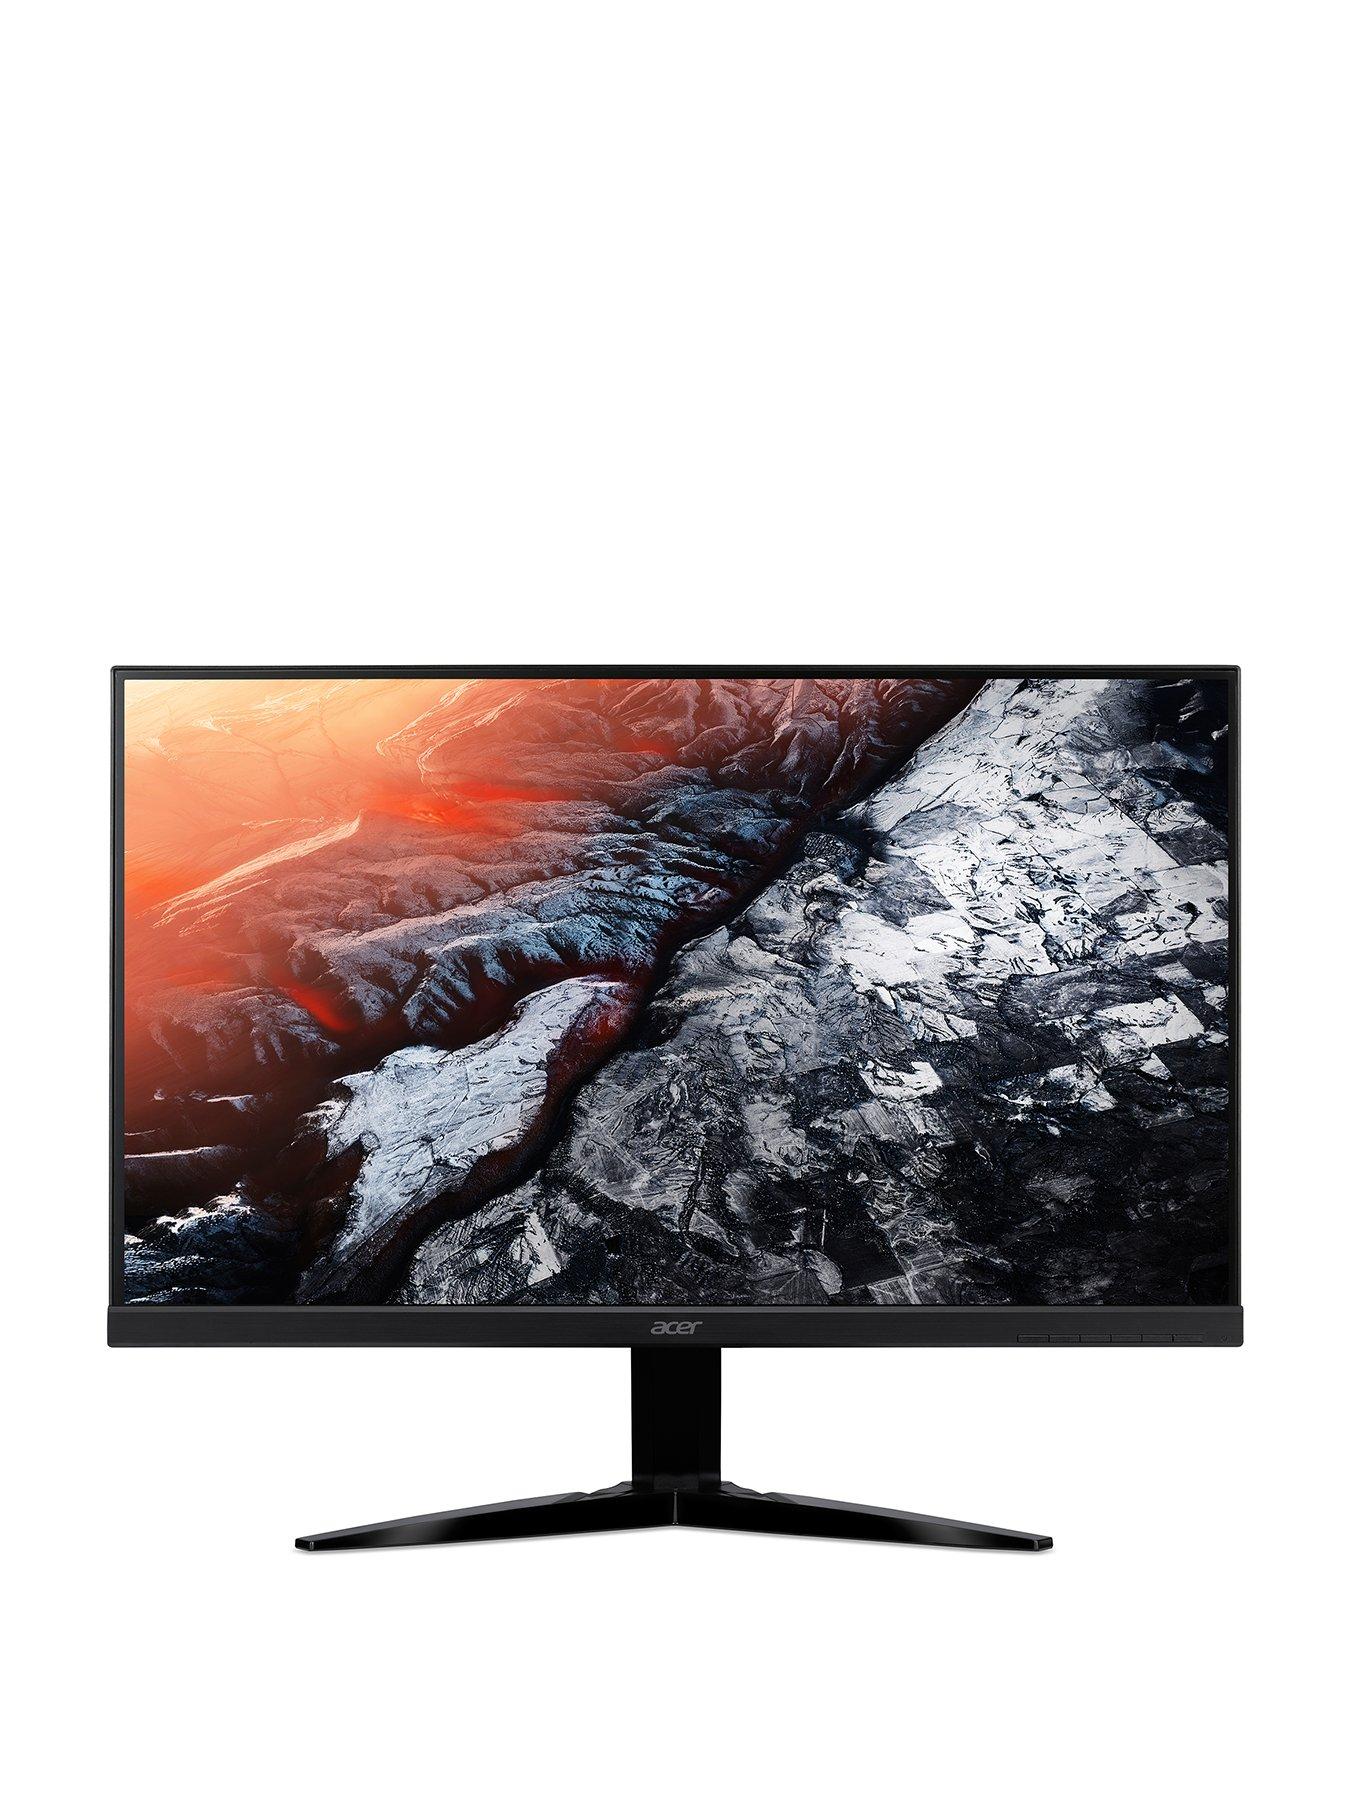 Acer Kg251Qfbmidpx 24.5In Fhd Gaming Monitor, 1Ms Response, 144Hz Refresh, Freesync&Trade;, Speakers